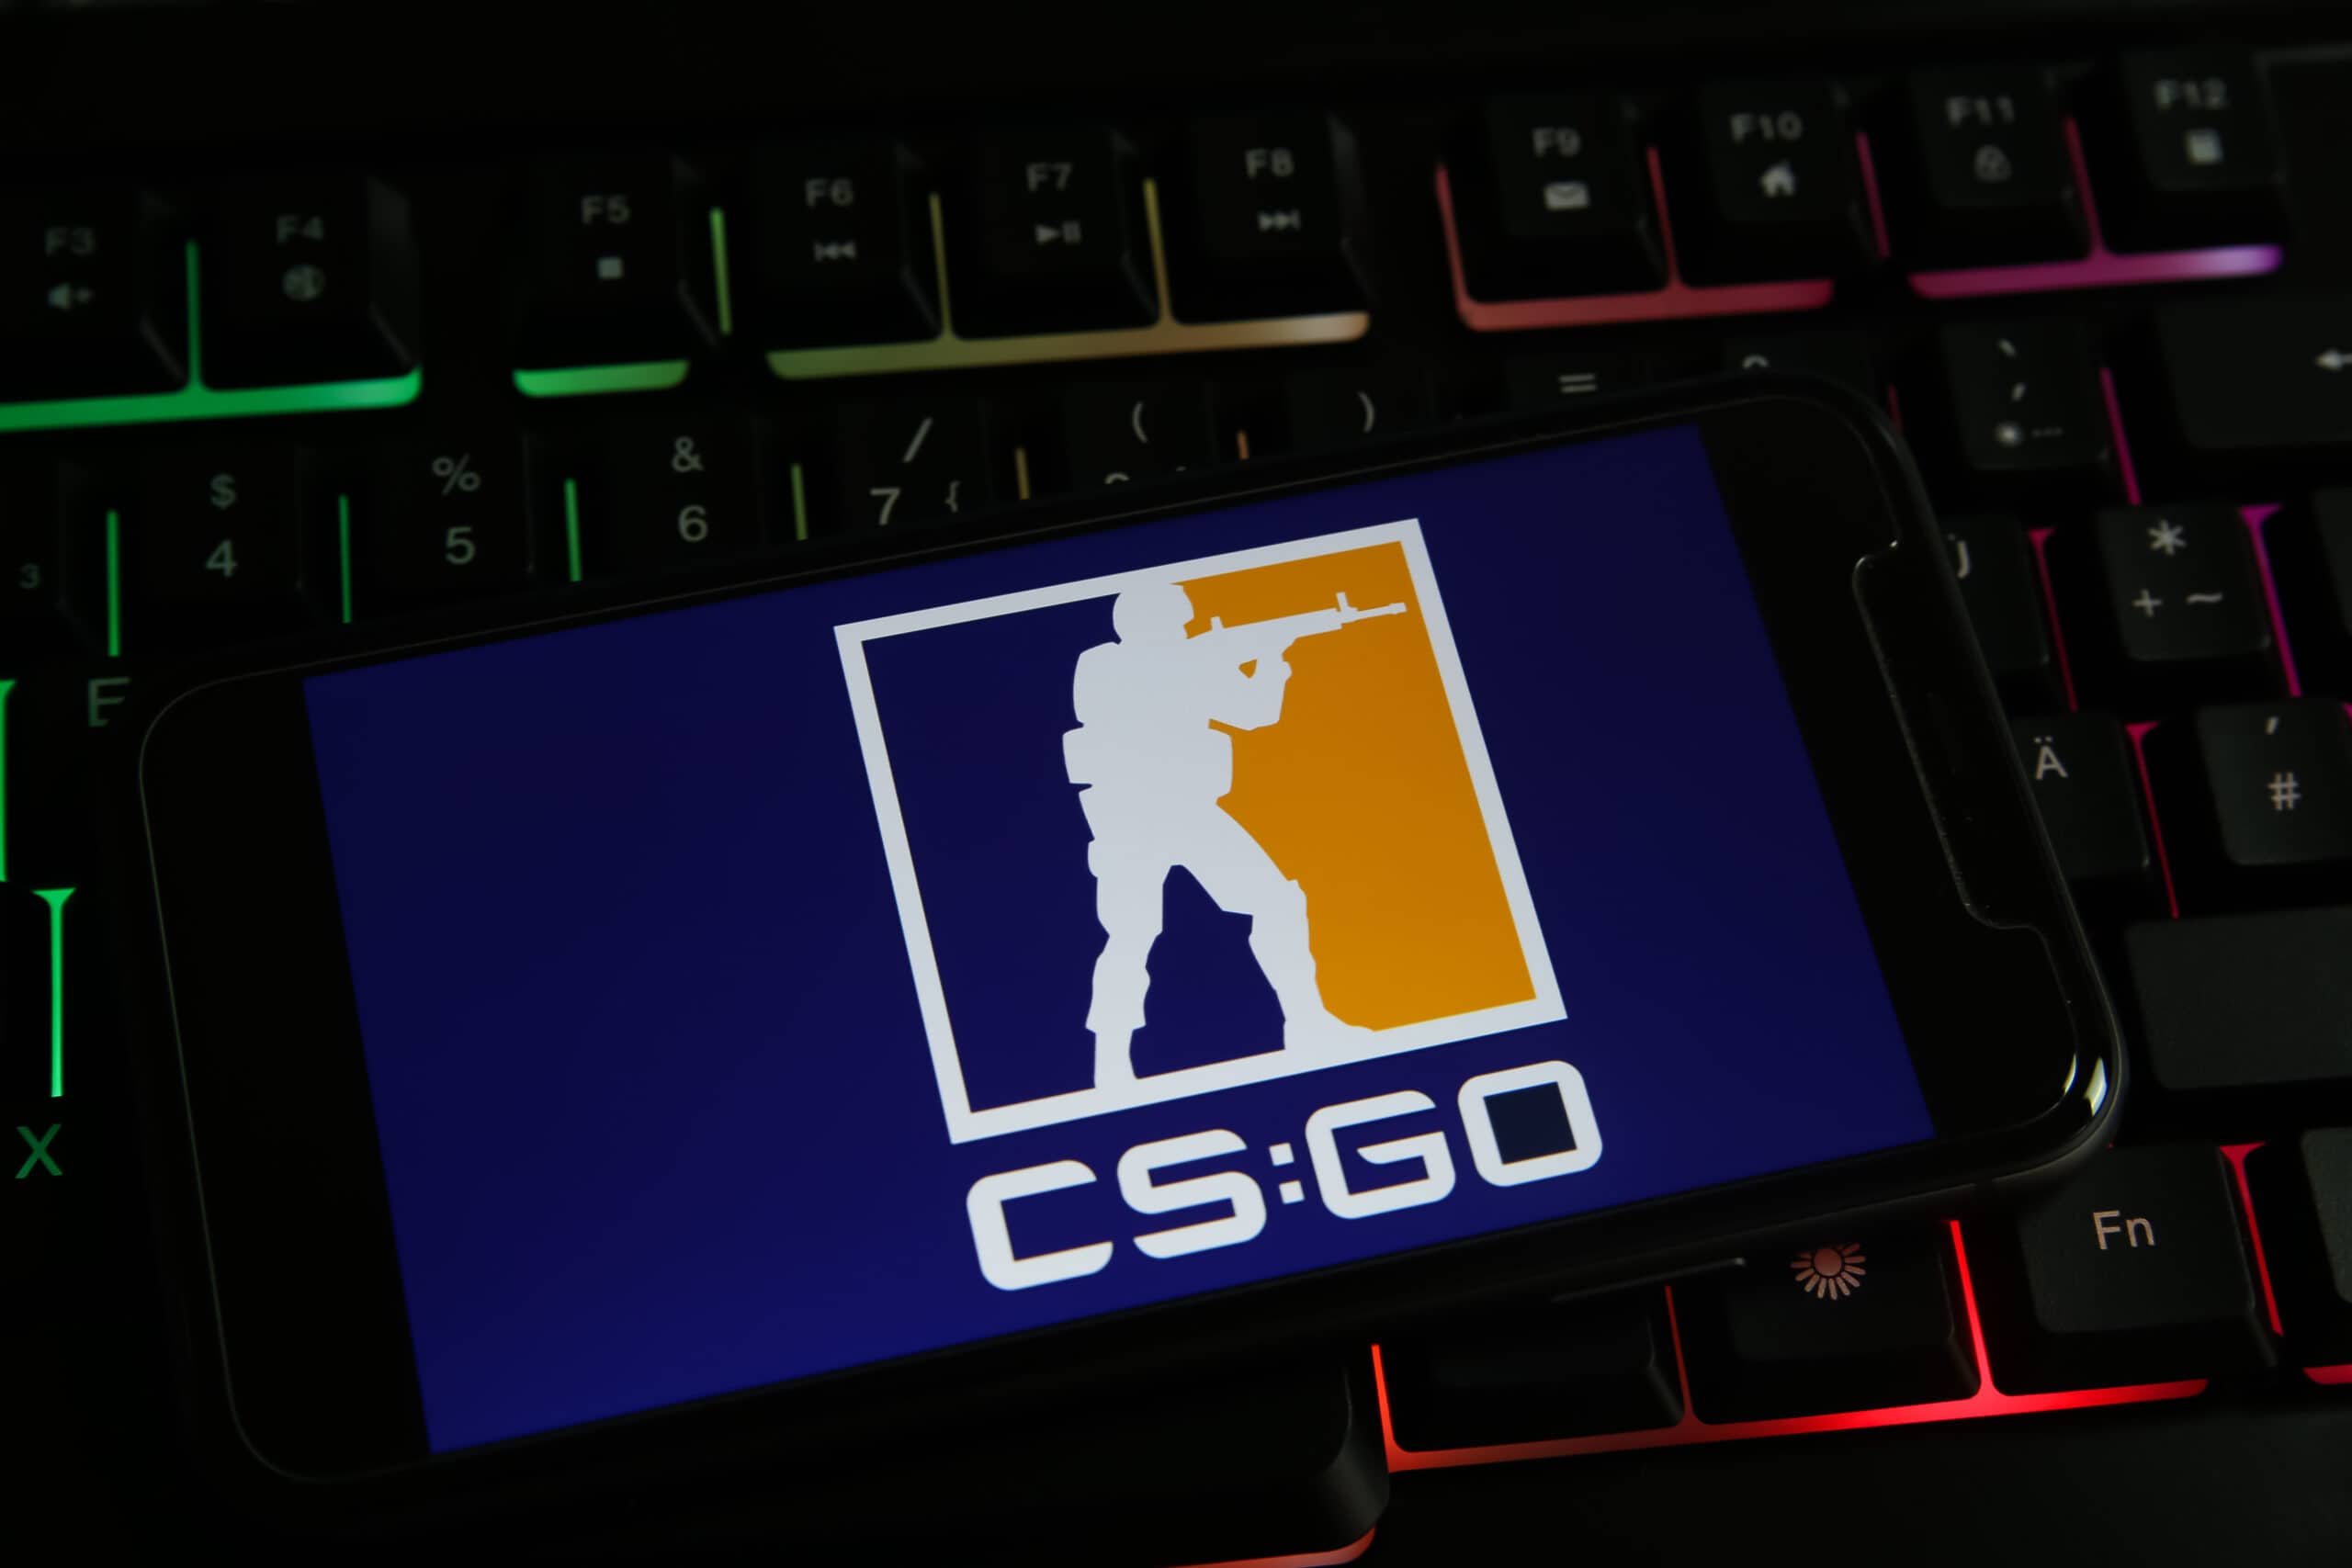 CSGO but it's on PS3 2022 